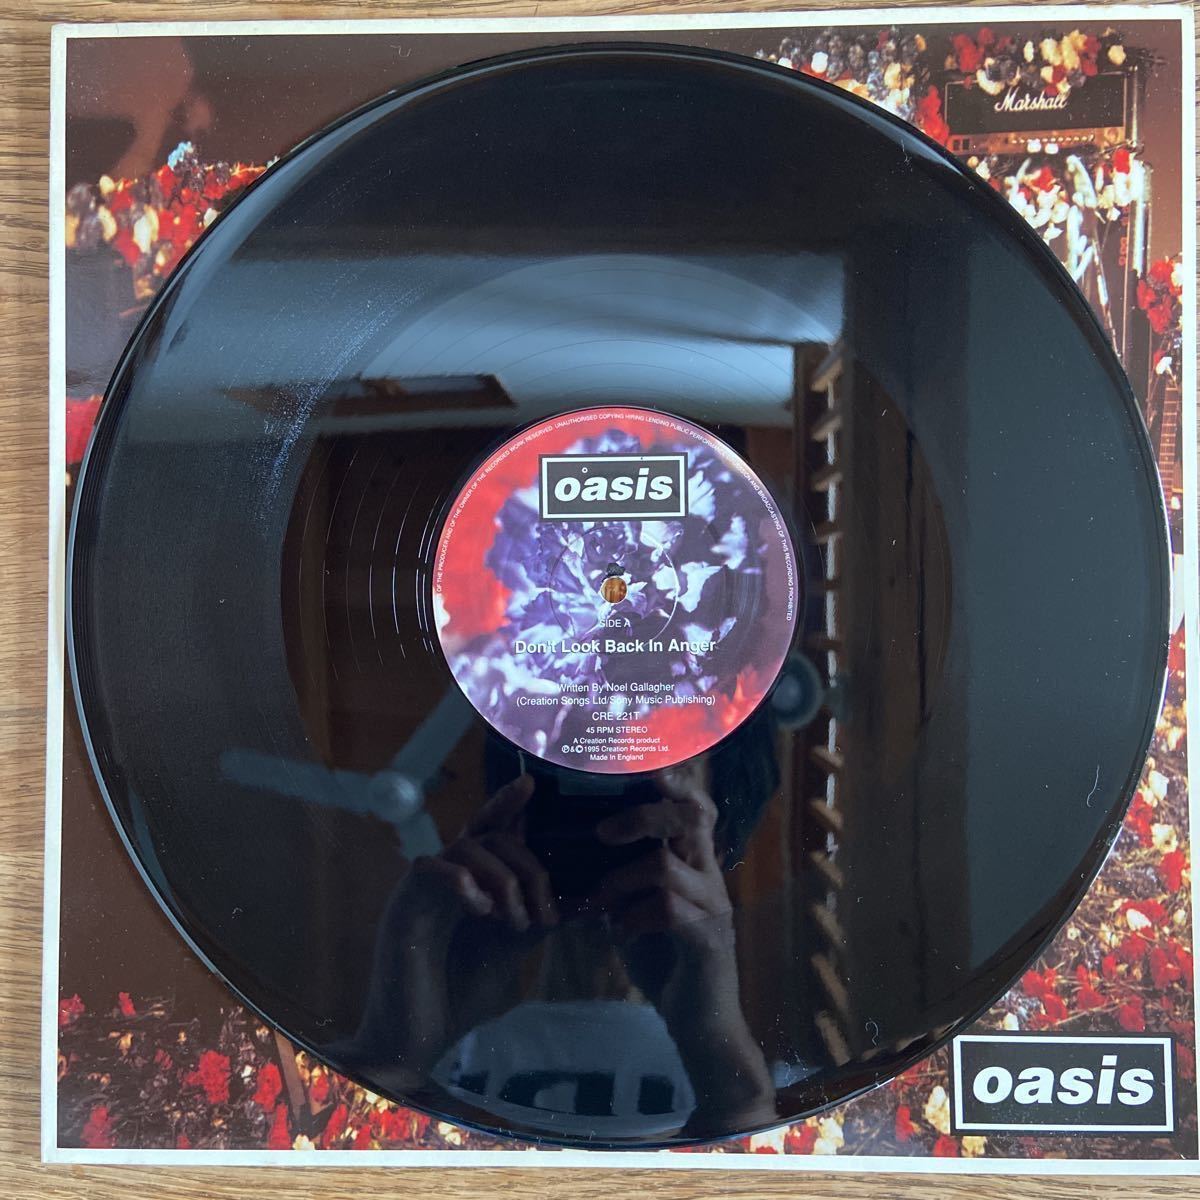 OASIS オアシスレコードDon't look back in Anger 12inch 45rpm UK